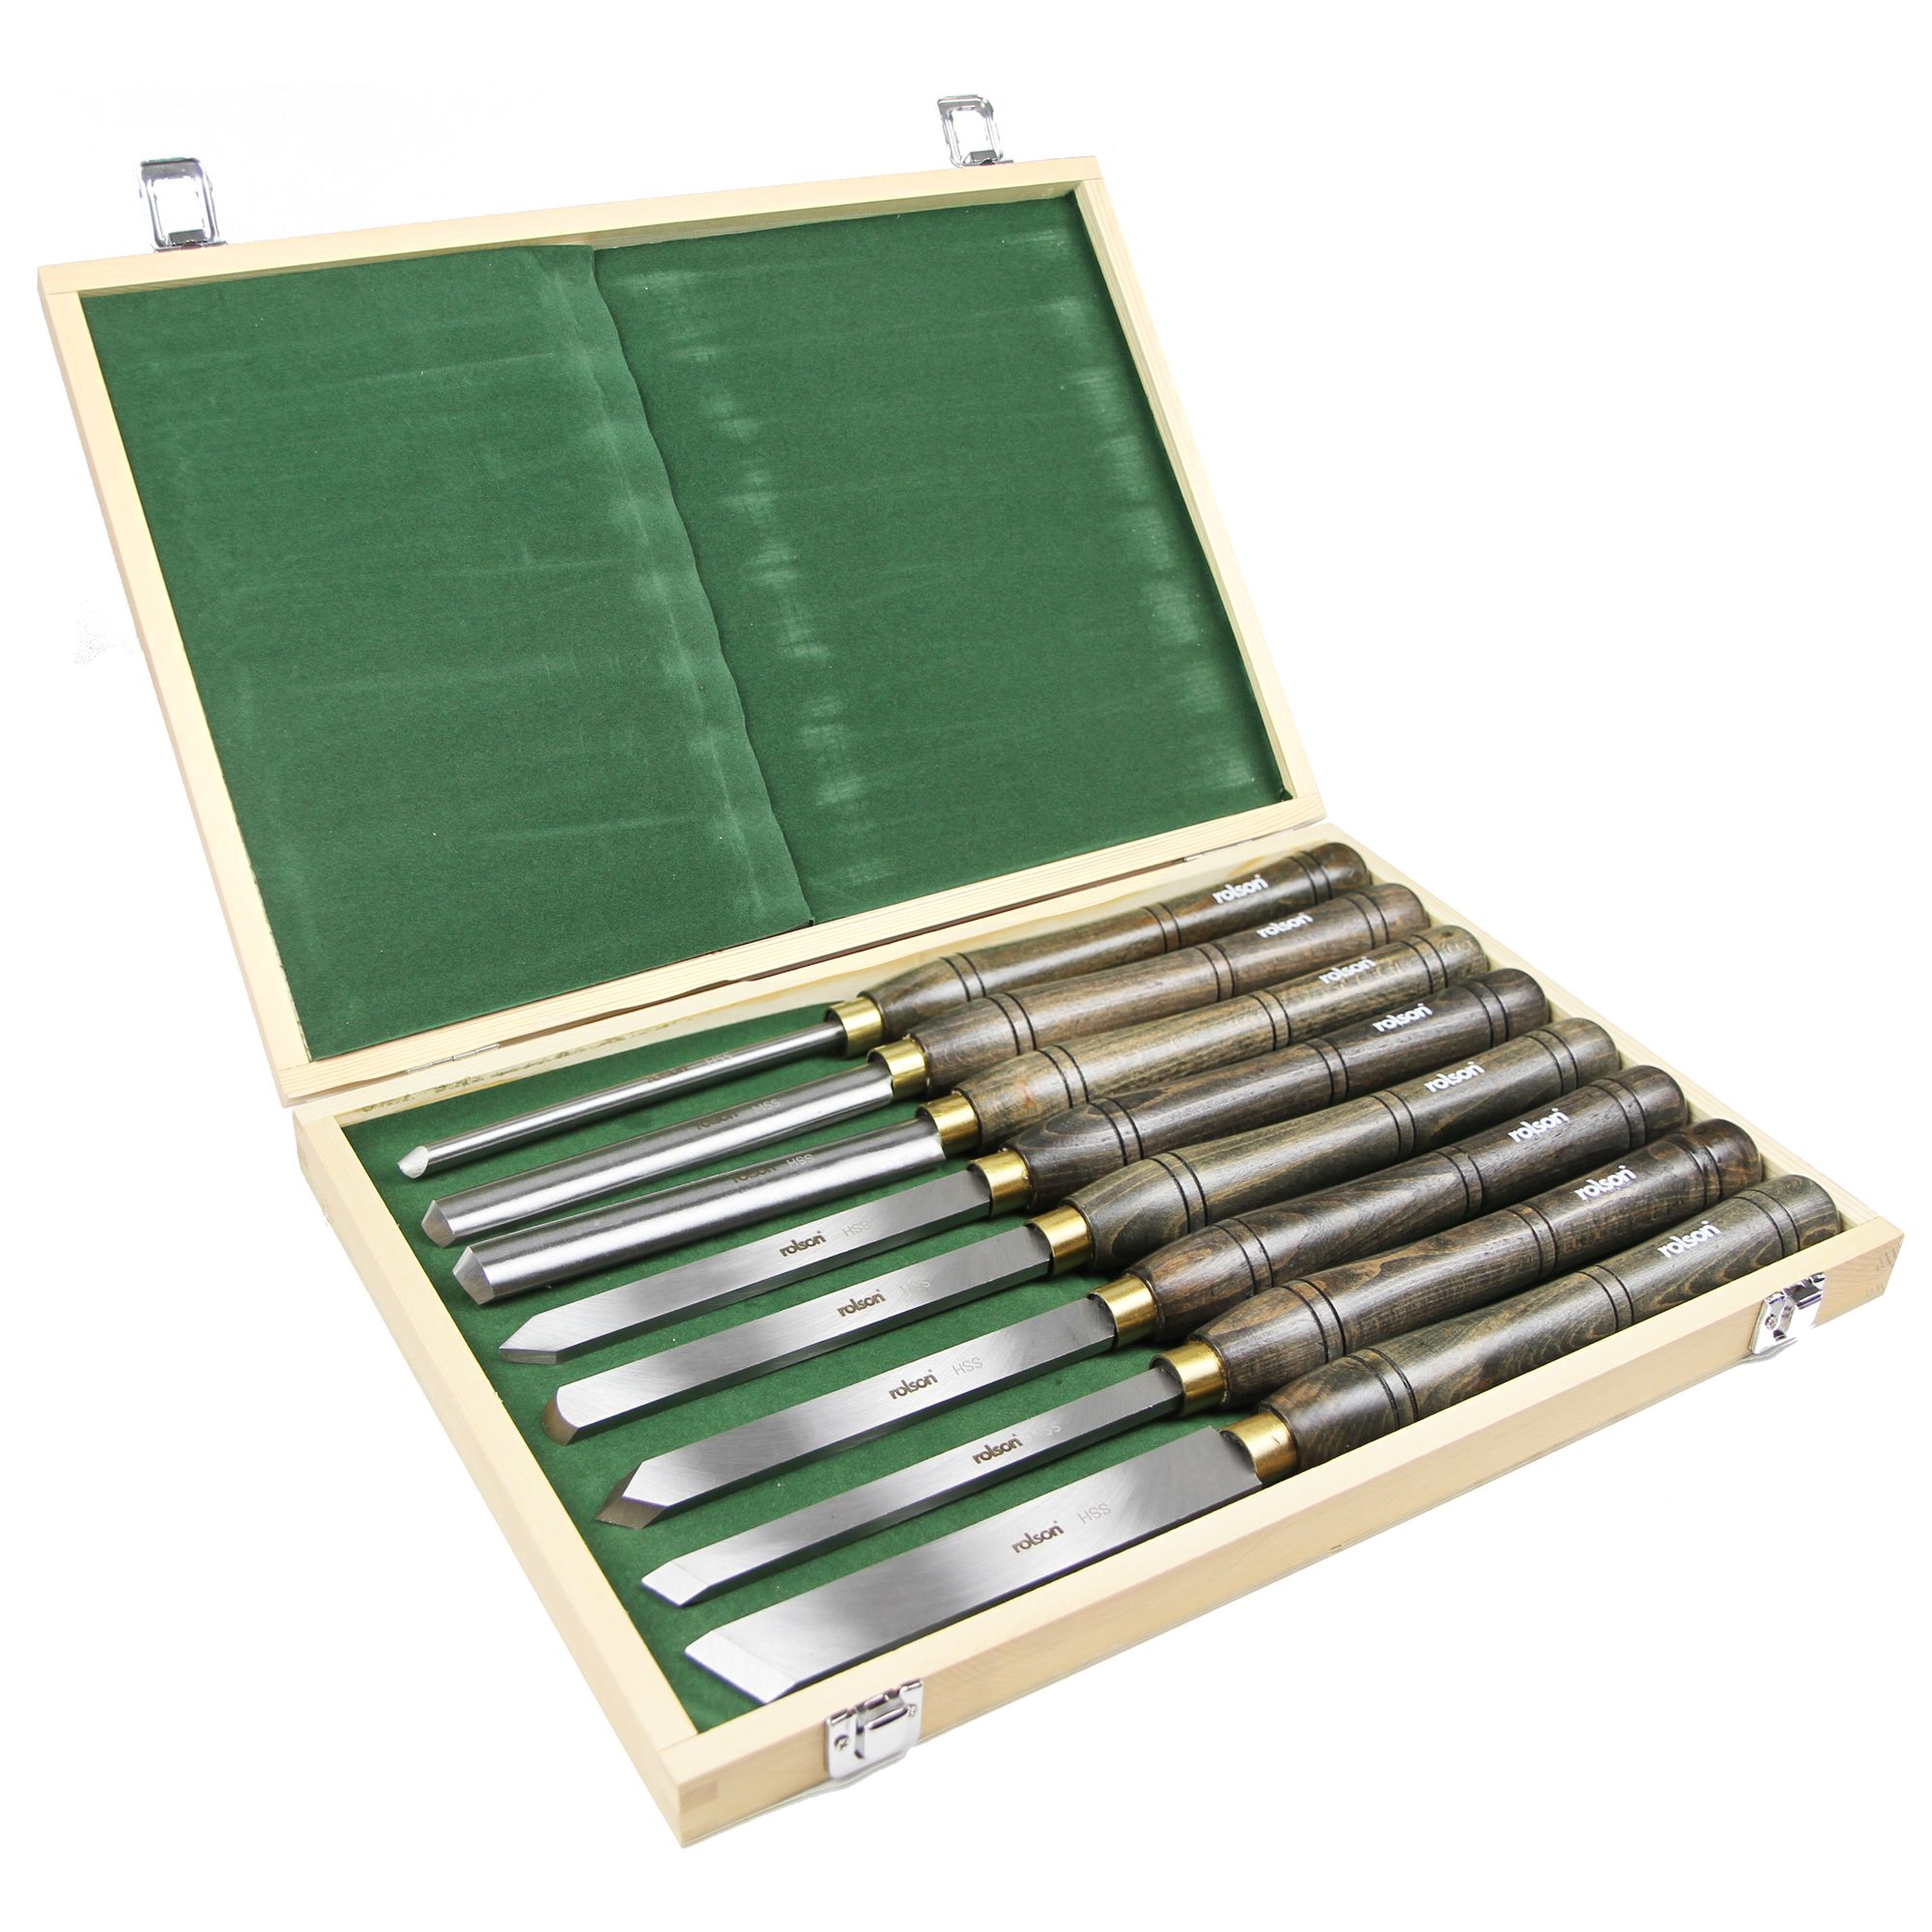 8pc Wood Chisel Set With 2 Sharpening Stone Walnut Handles and wooden Case